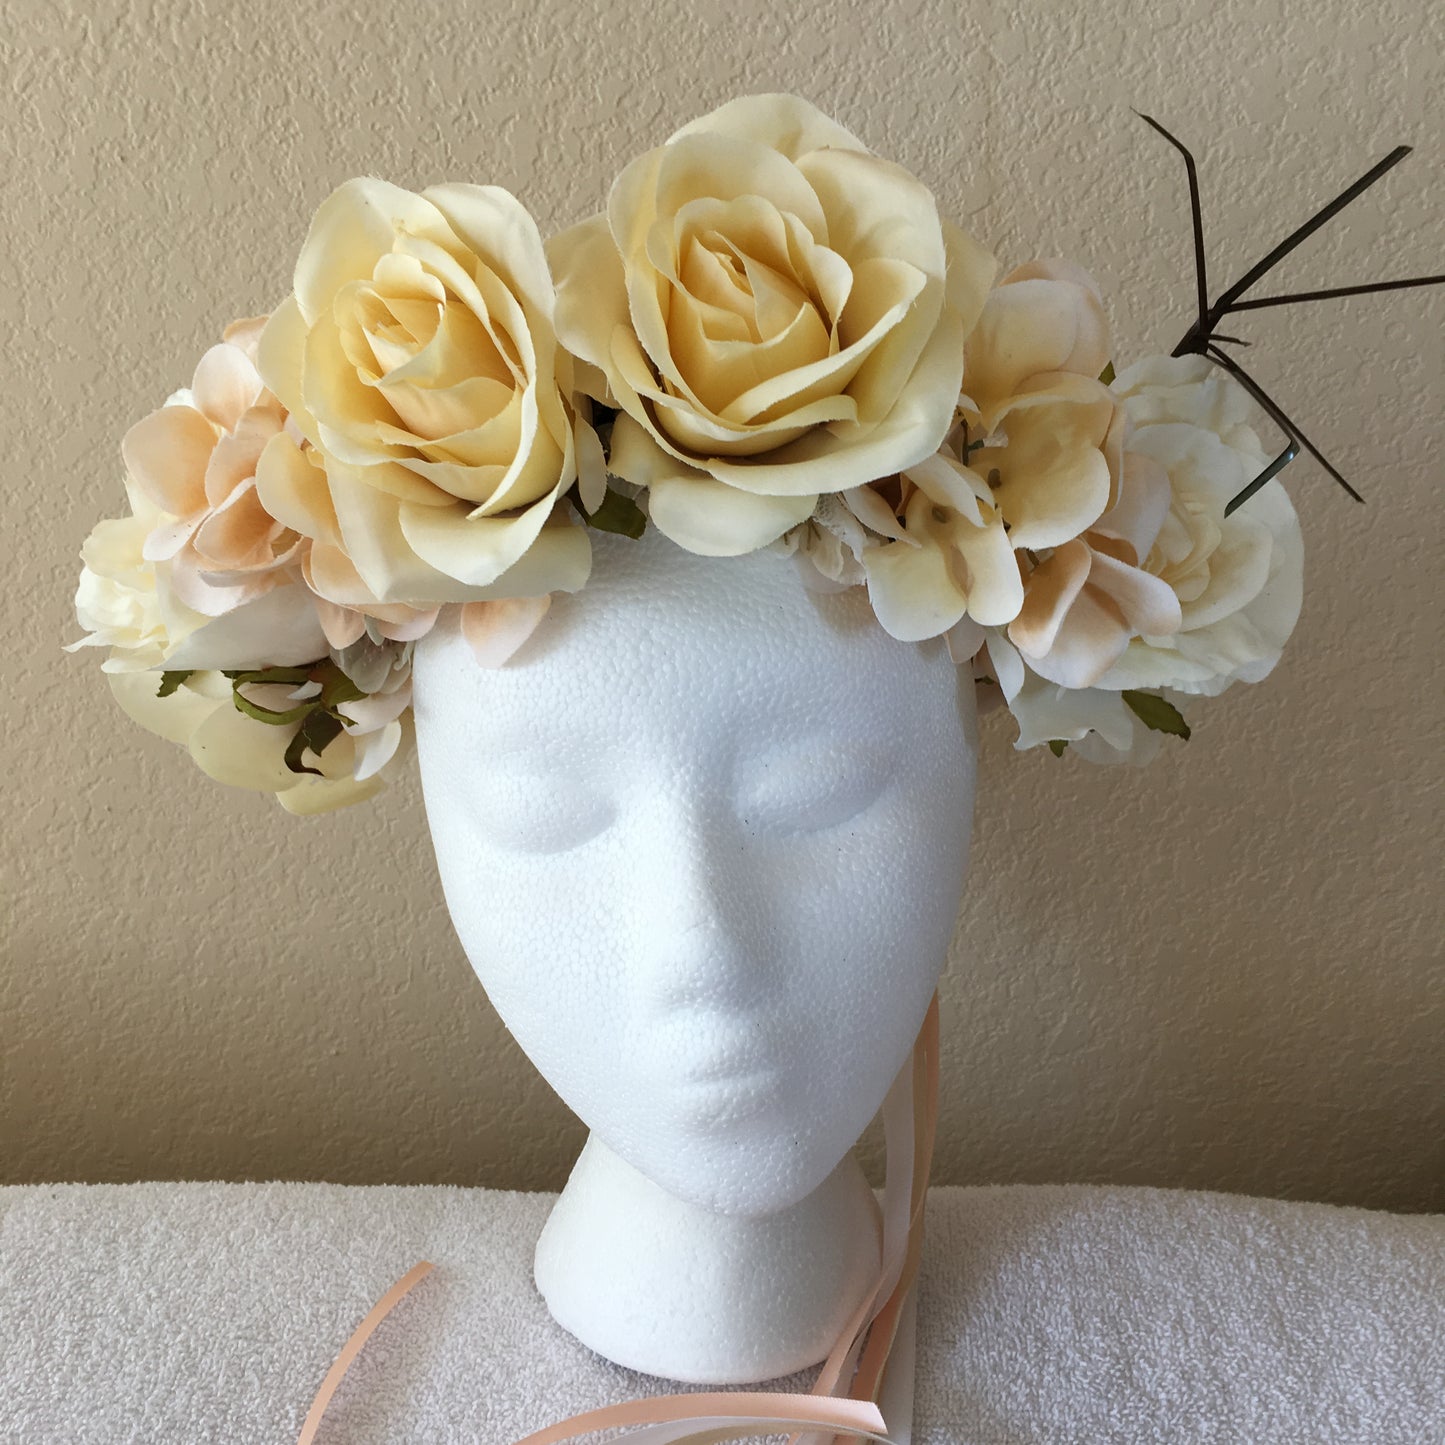 Extra Large Wreath - Peach flowers w/ pale yellow roses